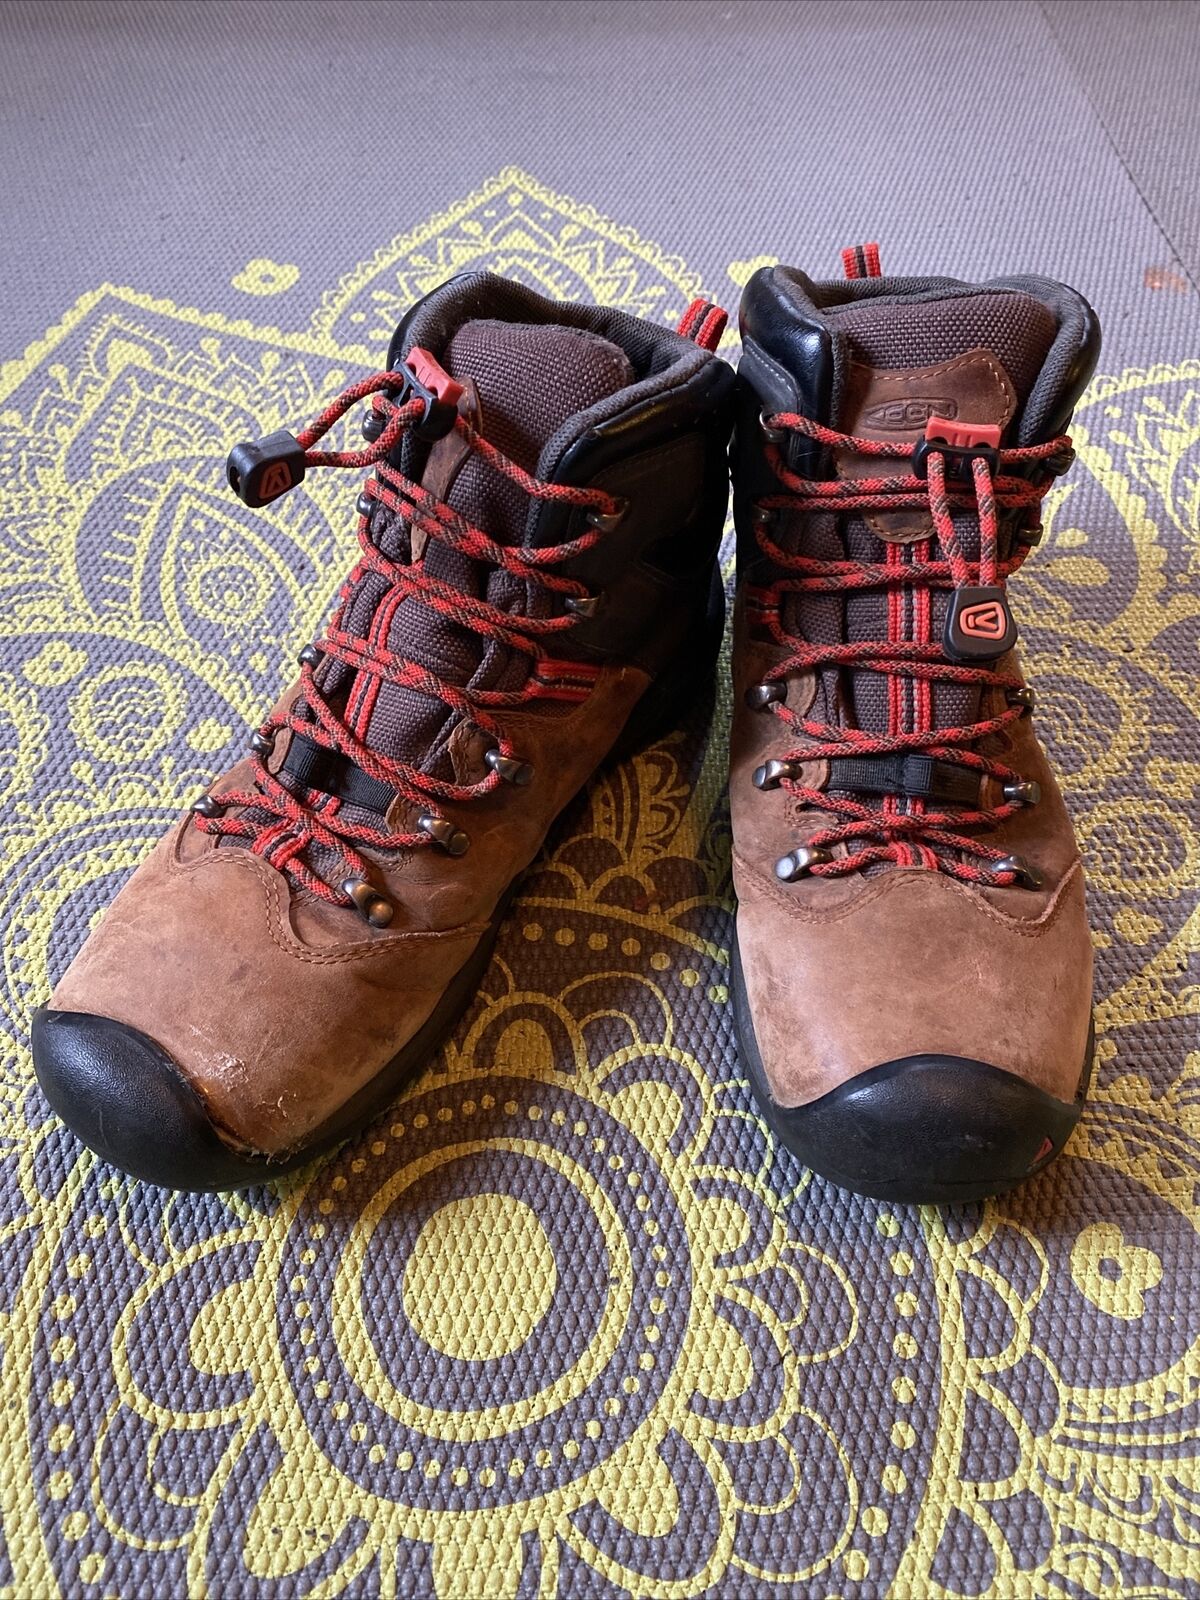 Keen Leather Hiking Boots Kids Youth Boys Girls Size US 5 EU 37 Brown Red Laces